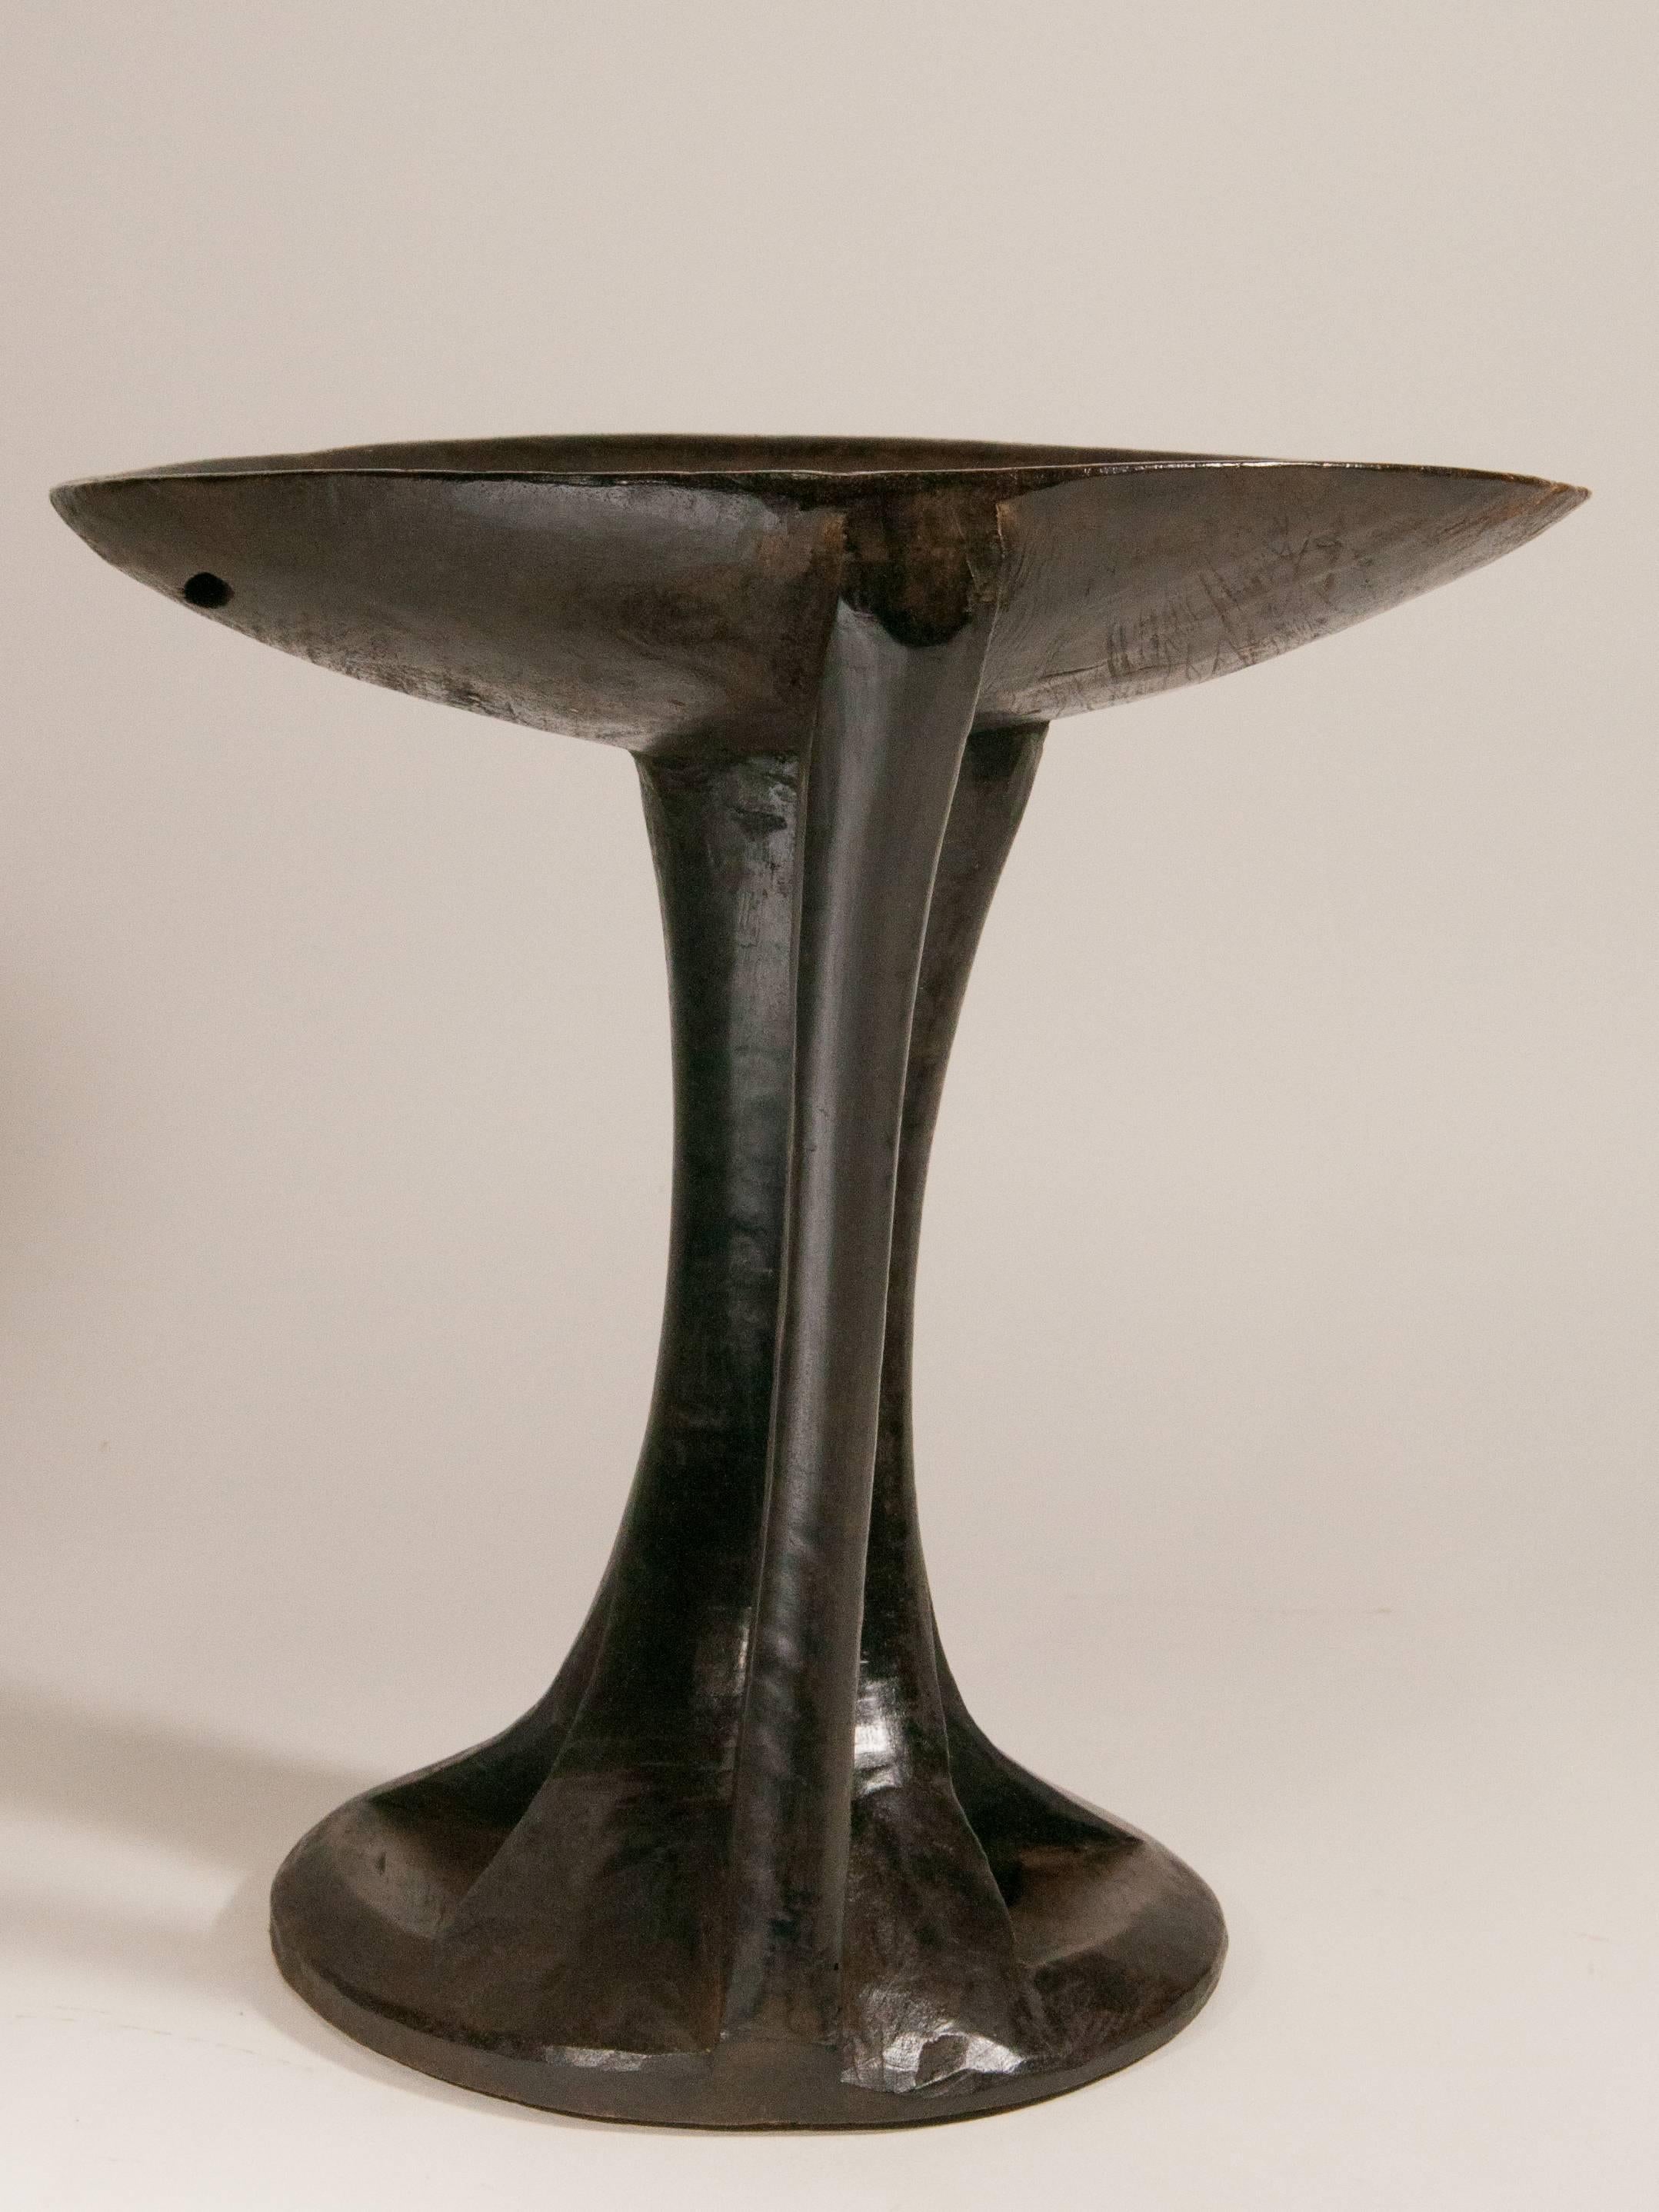 Mid-20th Century Tribal Wooden Food Tray on Stand with Handle, Nagaland, Mid-Late 20th Century